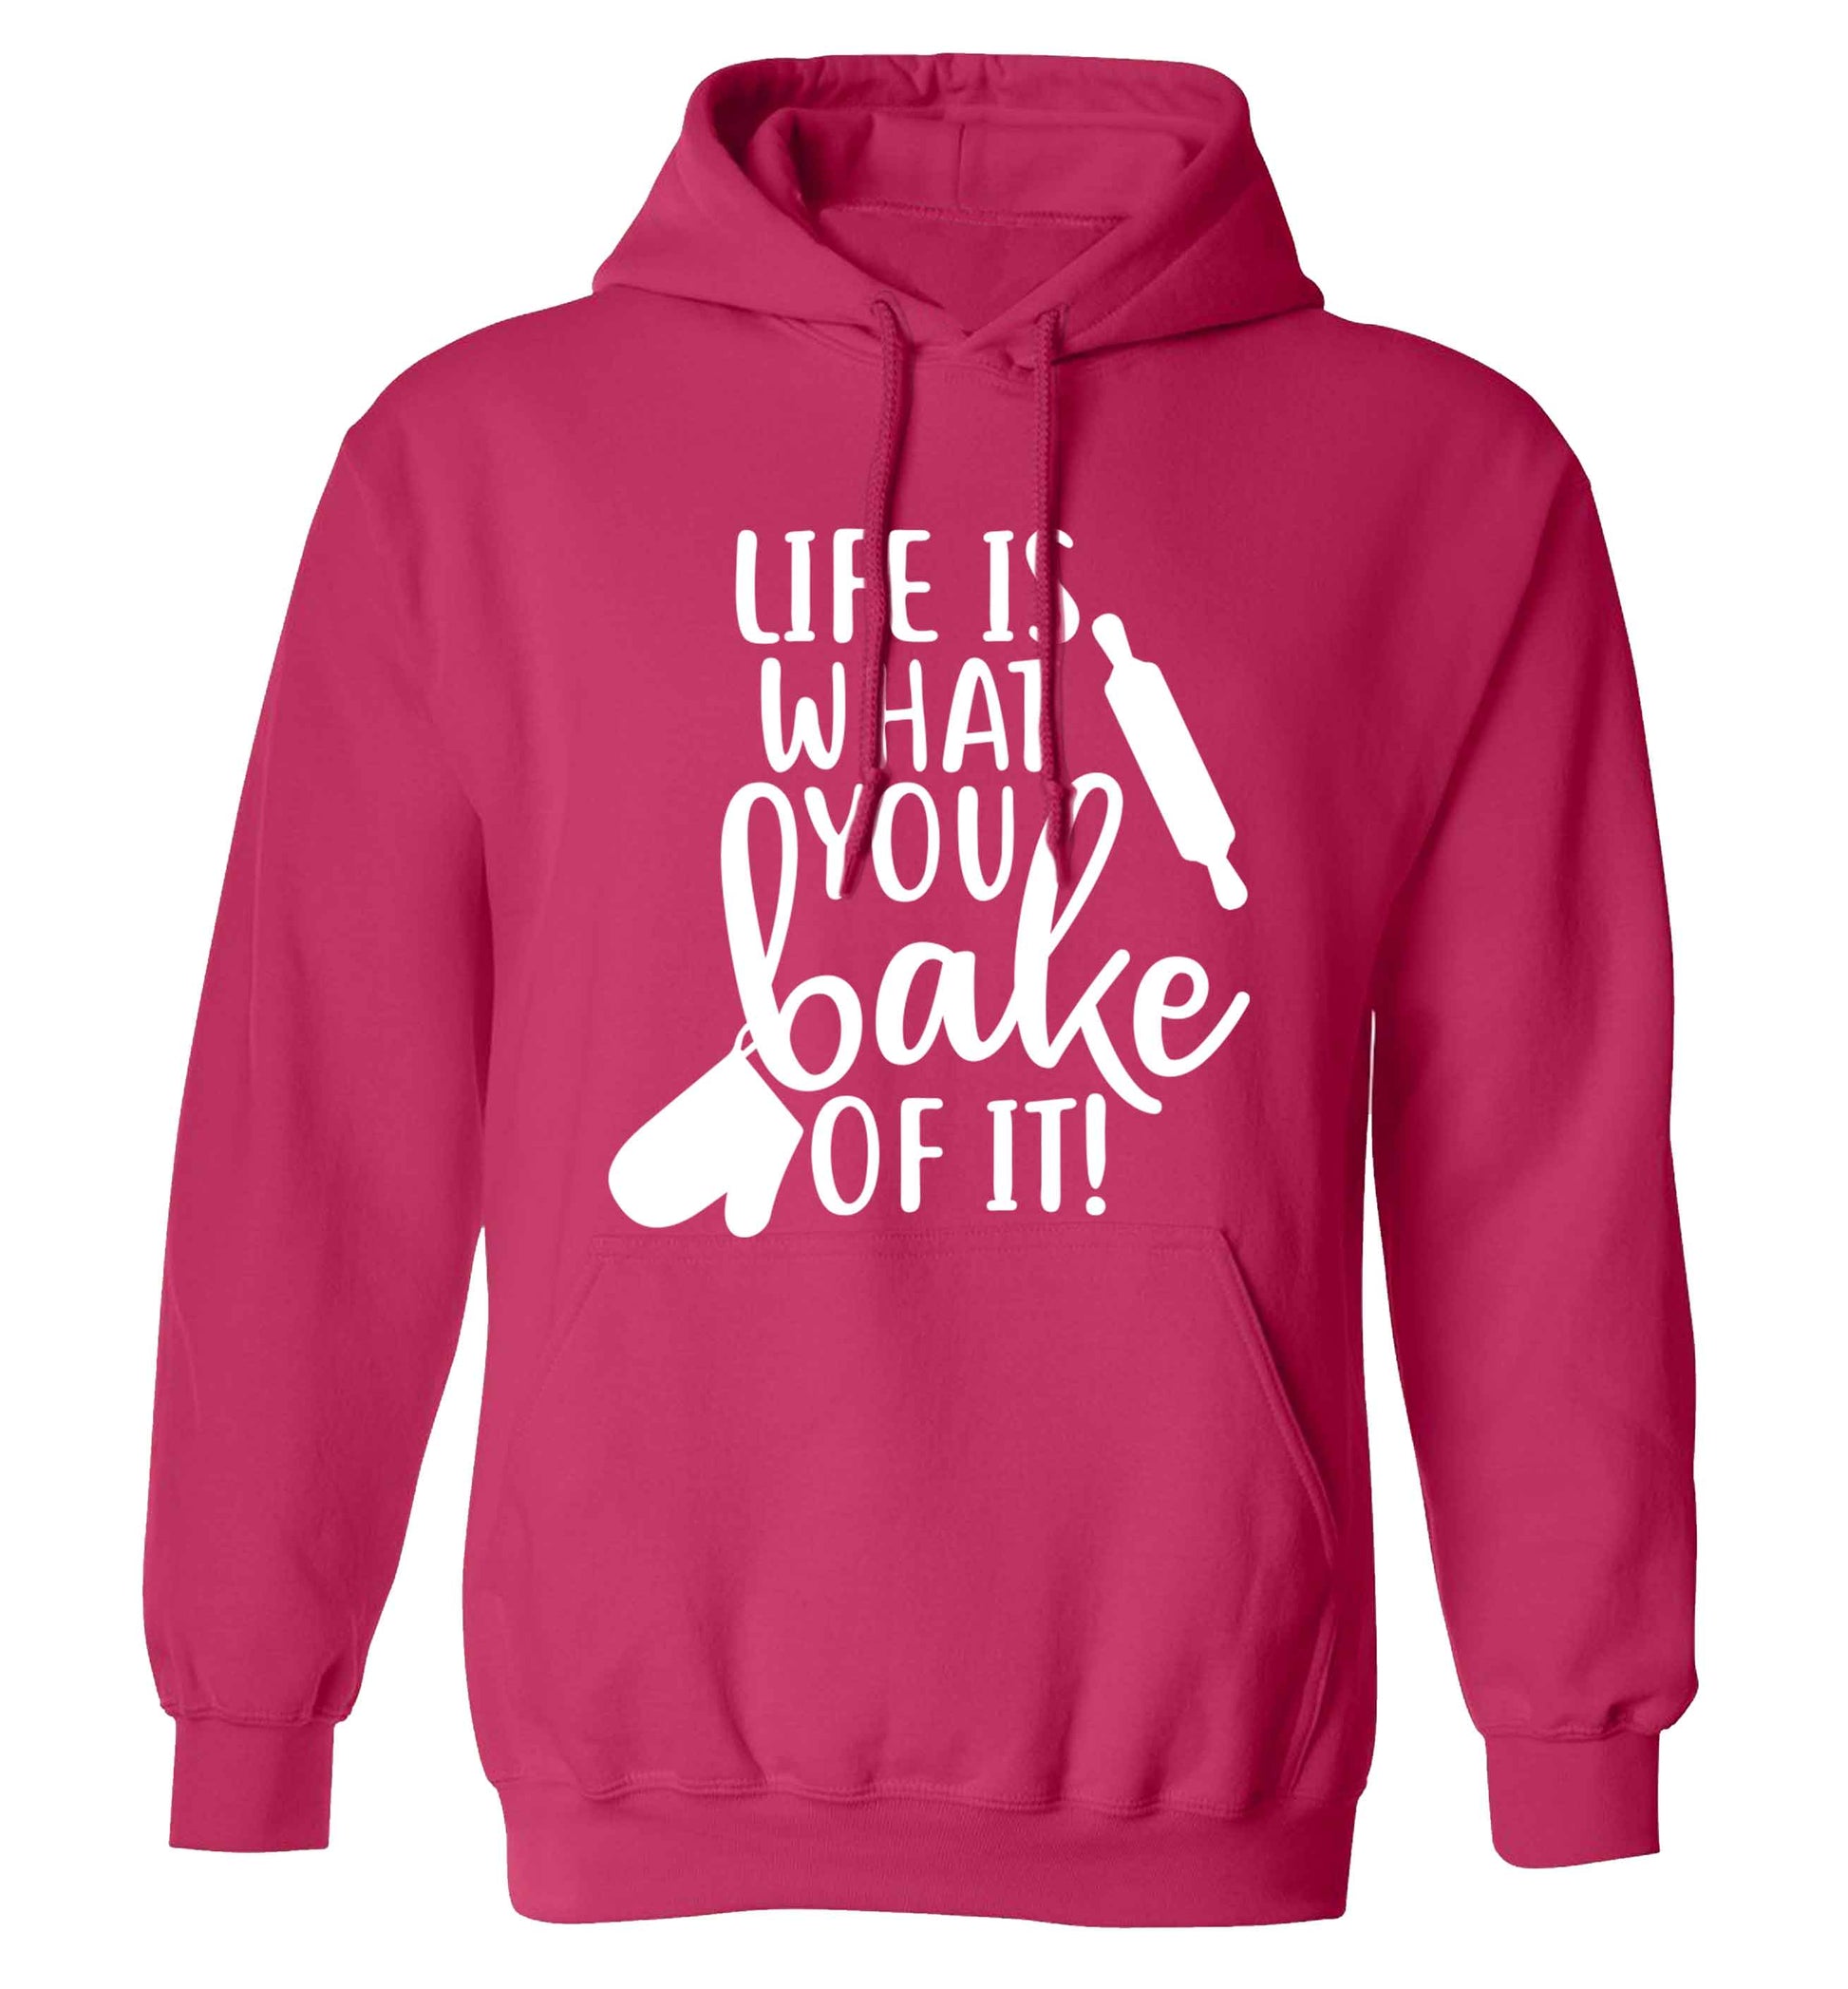 Life is what you bake of it adults unisex pink hoodie 2XL